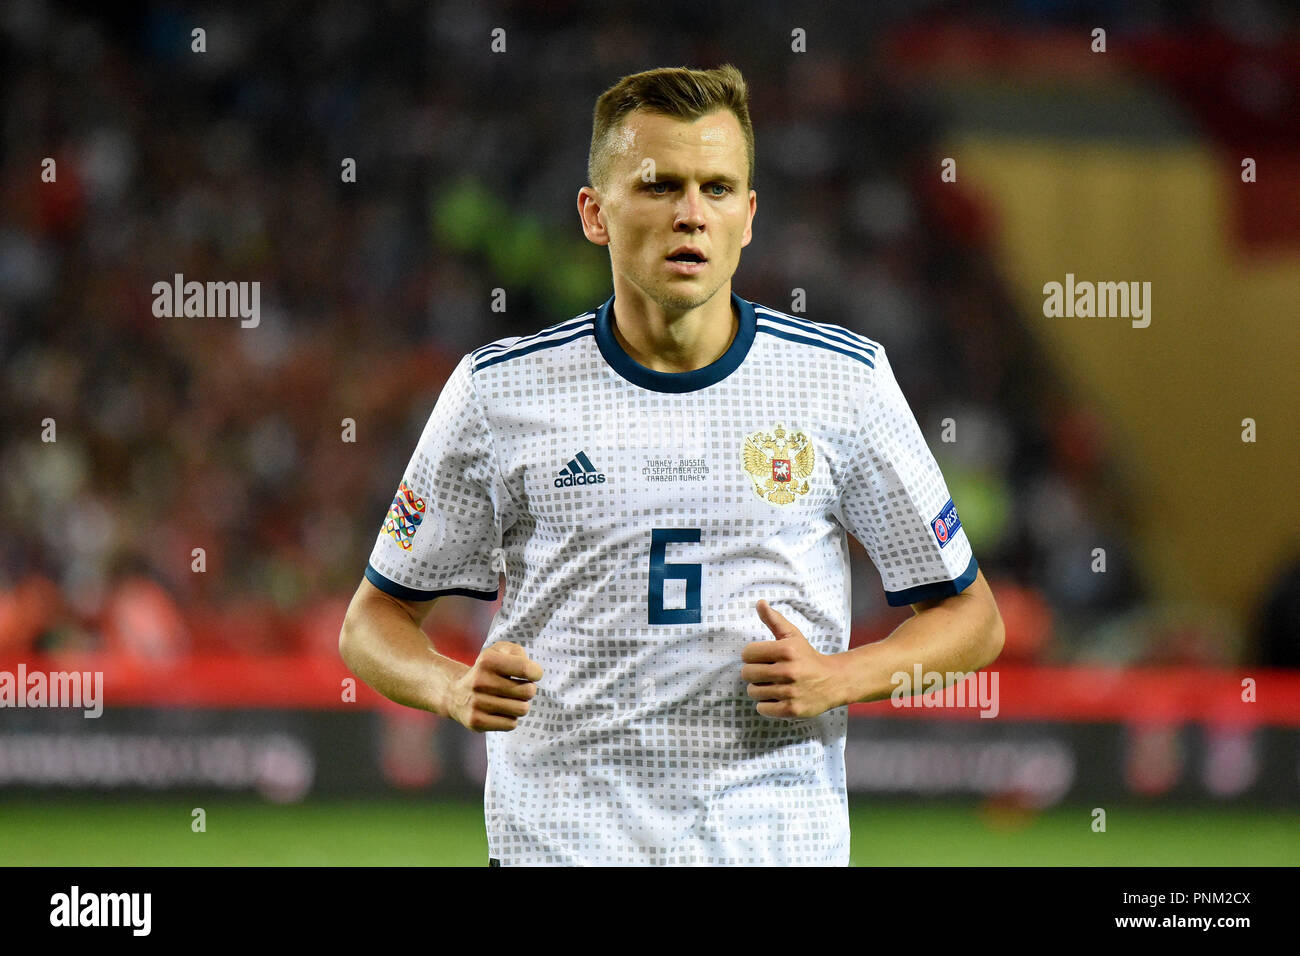 Trabzon, Turkey - September 7, 2018. Russian midfielder Denis Cheryshev during UEFA Nations League match Turkey vs Russia in Trabzon. Stock Photo